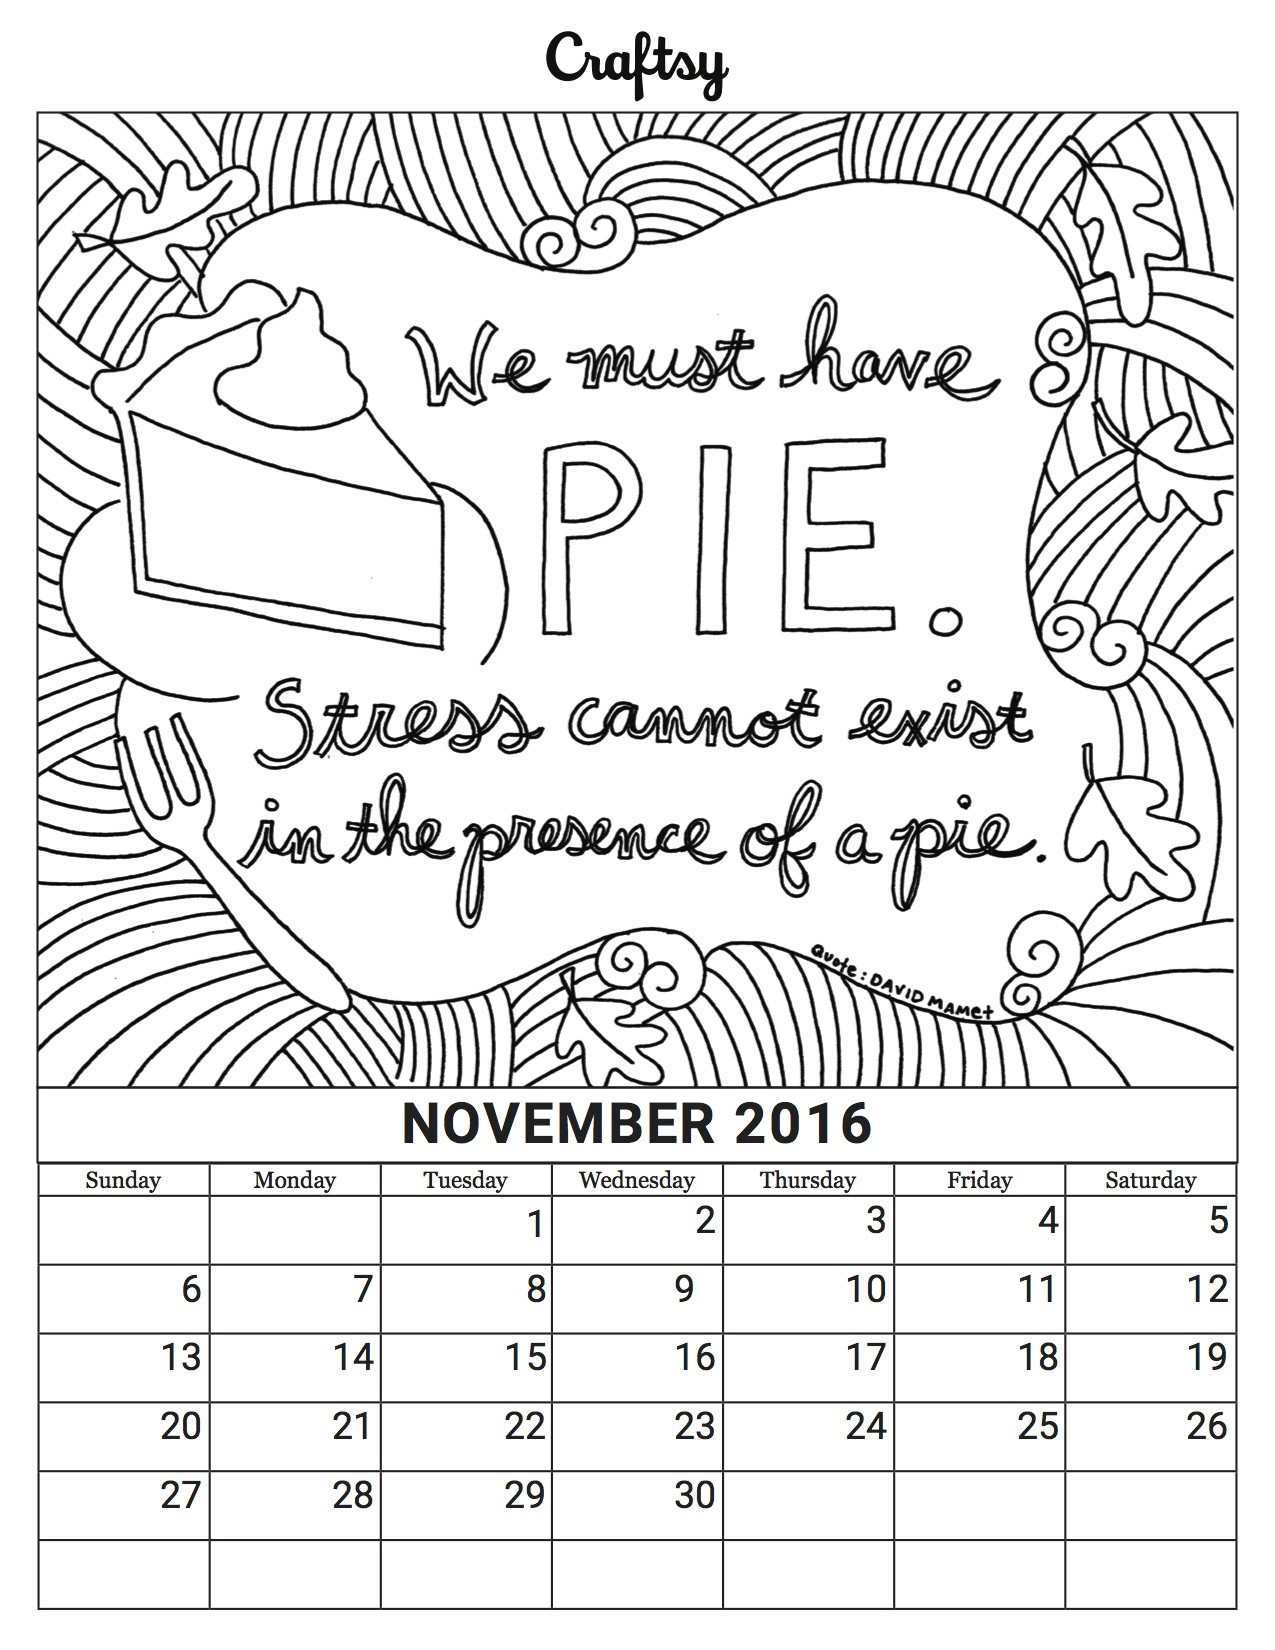 Coloring Book Calendars
 November 2016 Coloring Calendar Page from Craftsy